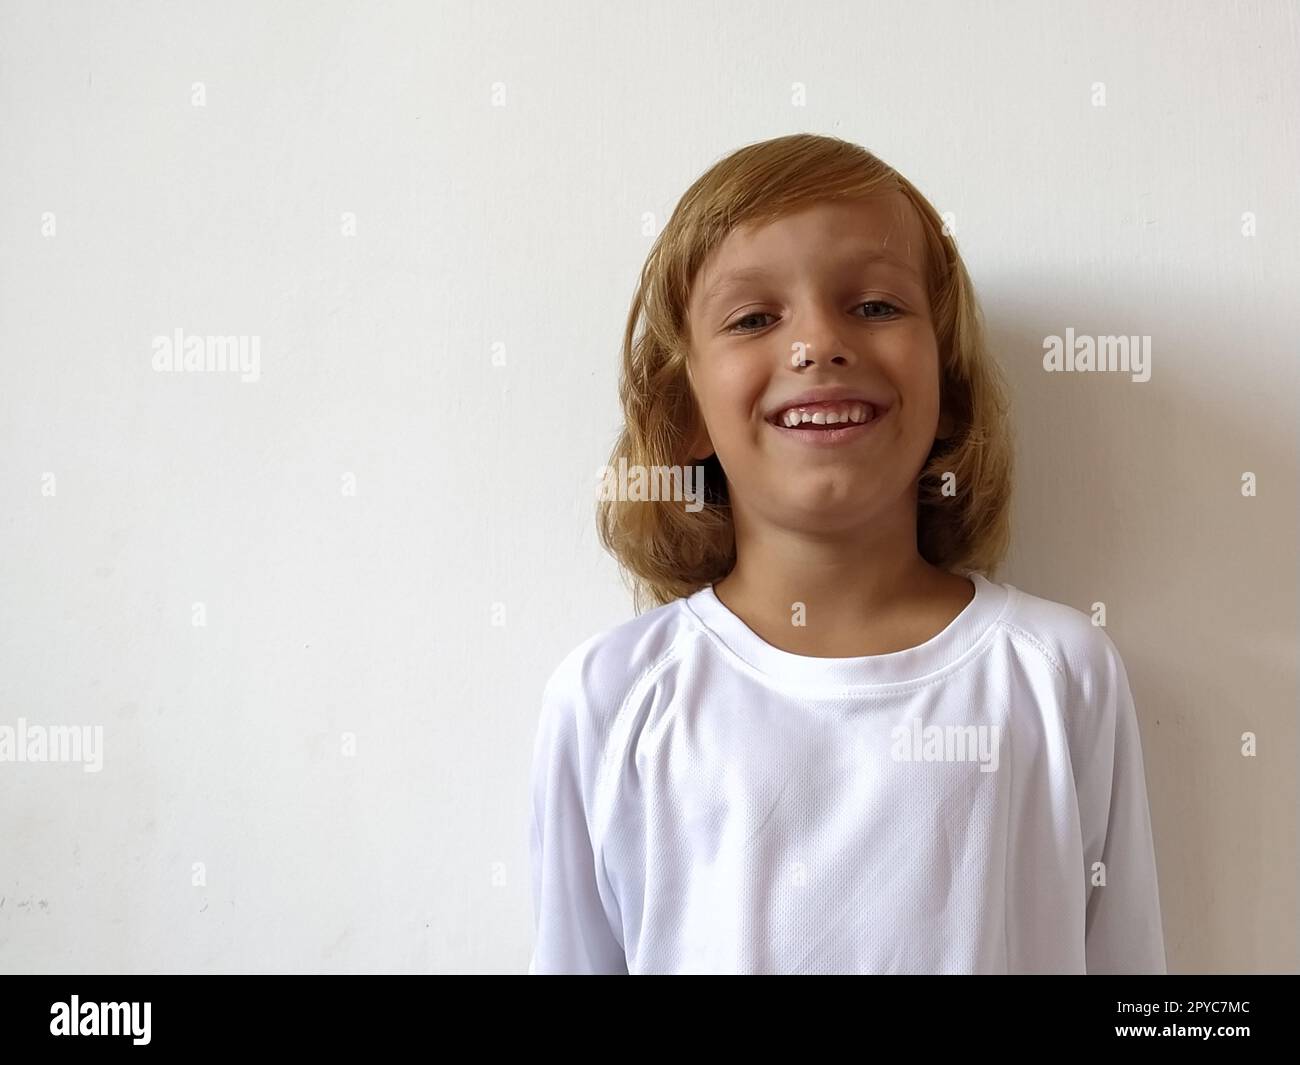 Little pretty girl age 6-7 years with light hair expresses emotional joy and a smile on a white background. A child with tanned skin. White T-shirt. Copy space Stock Photo